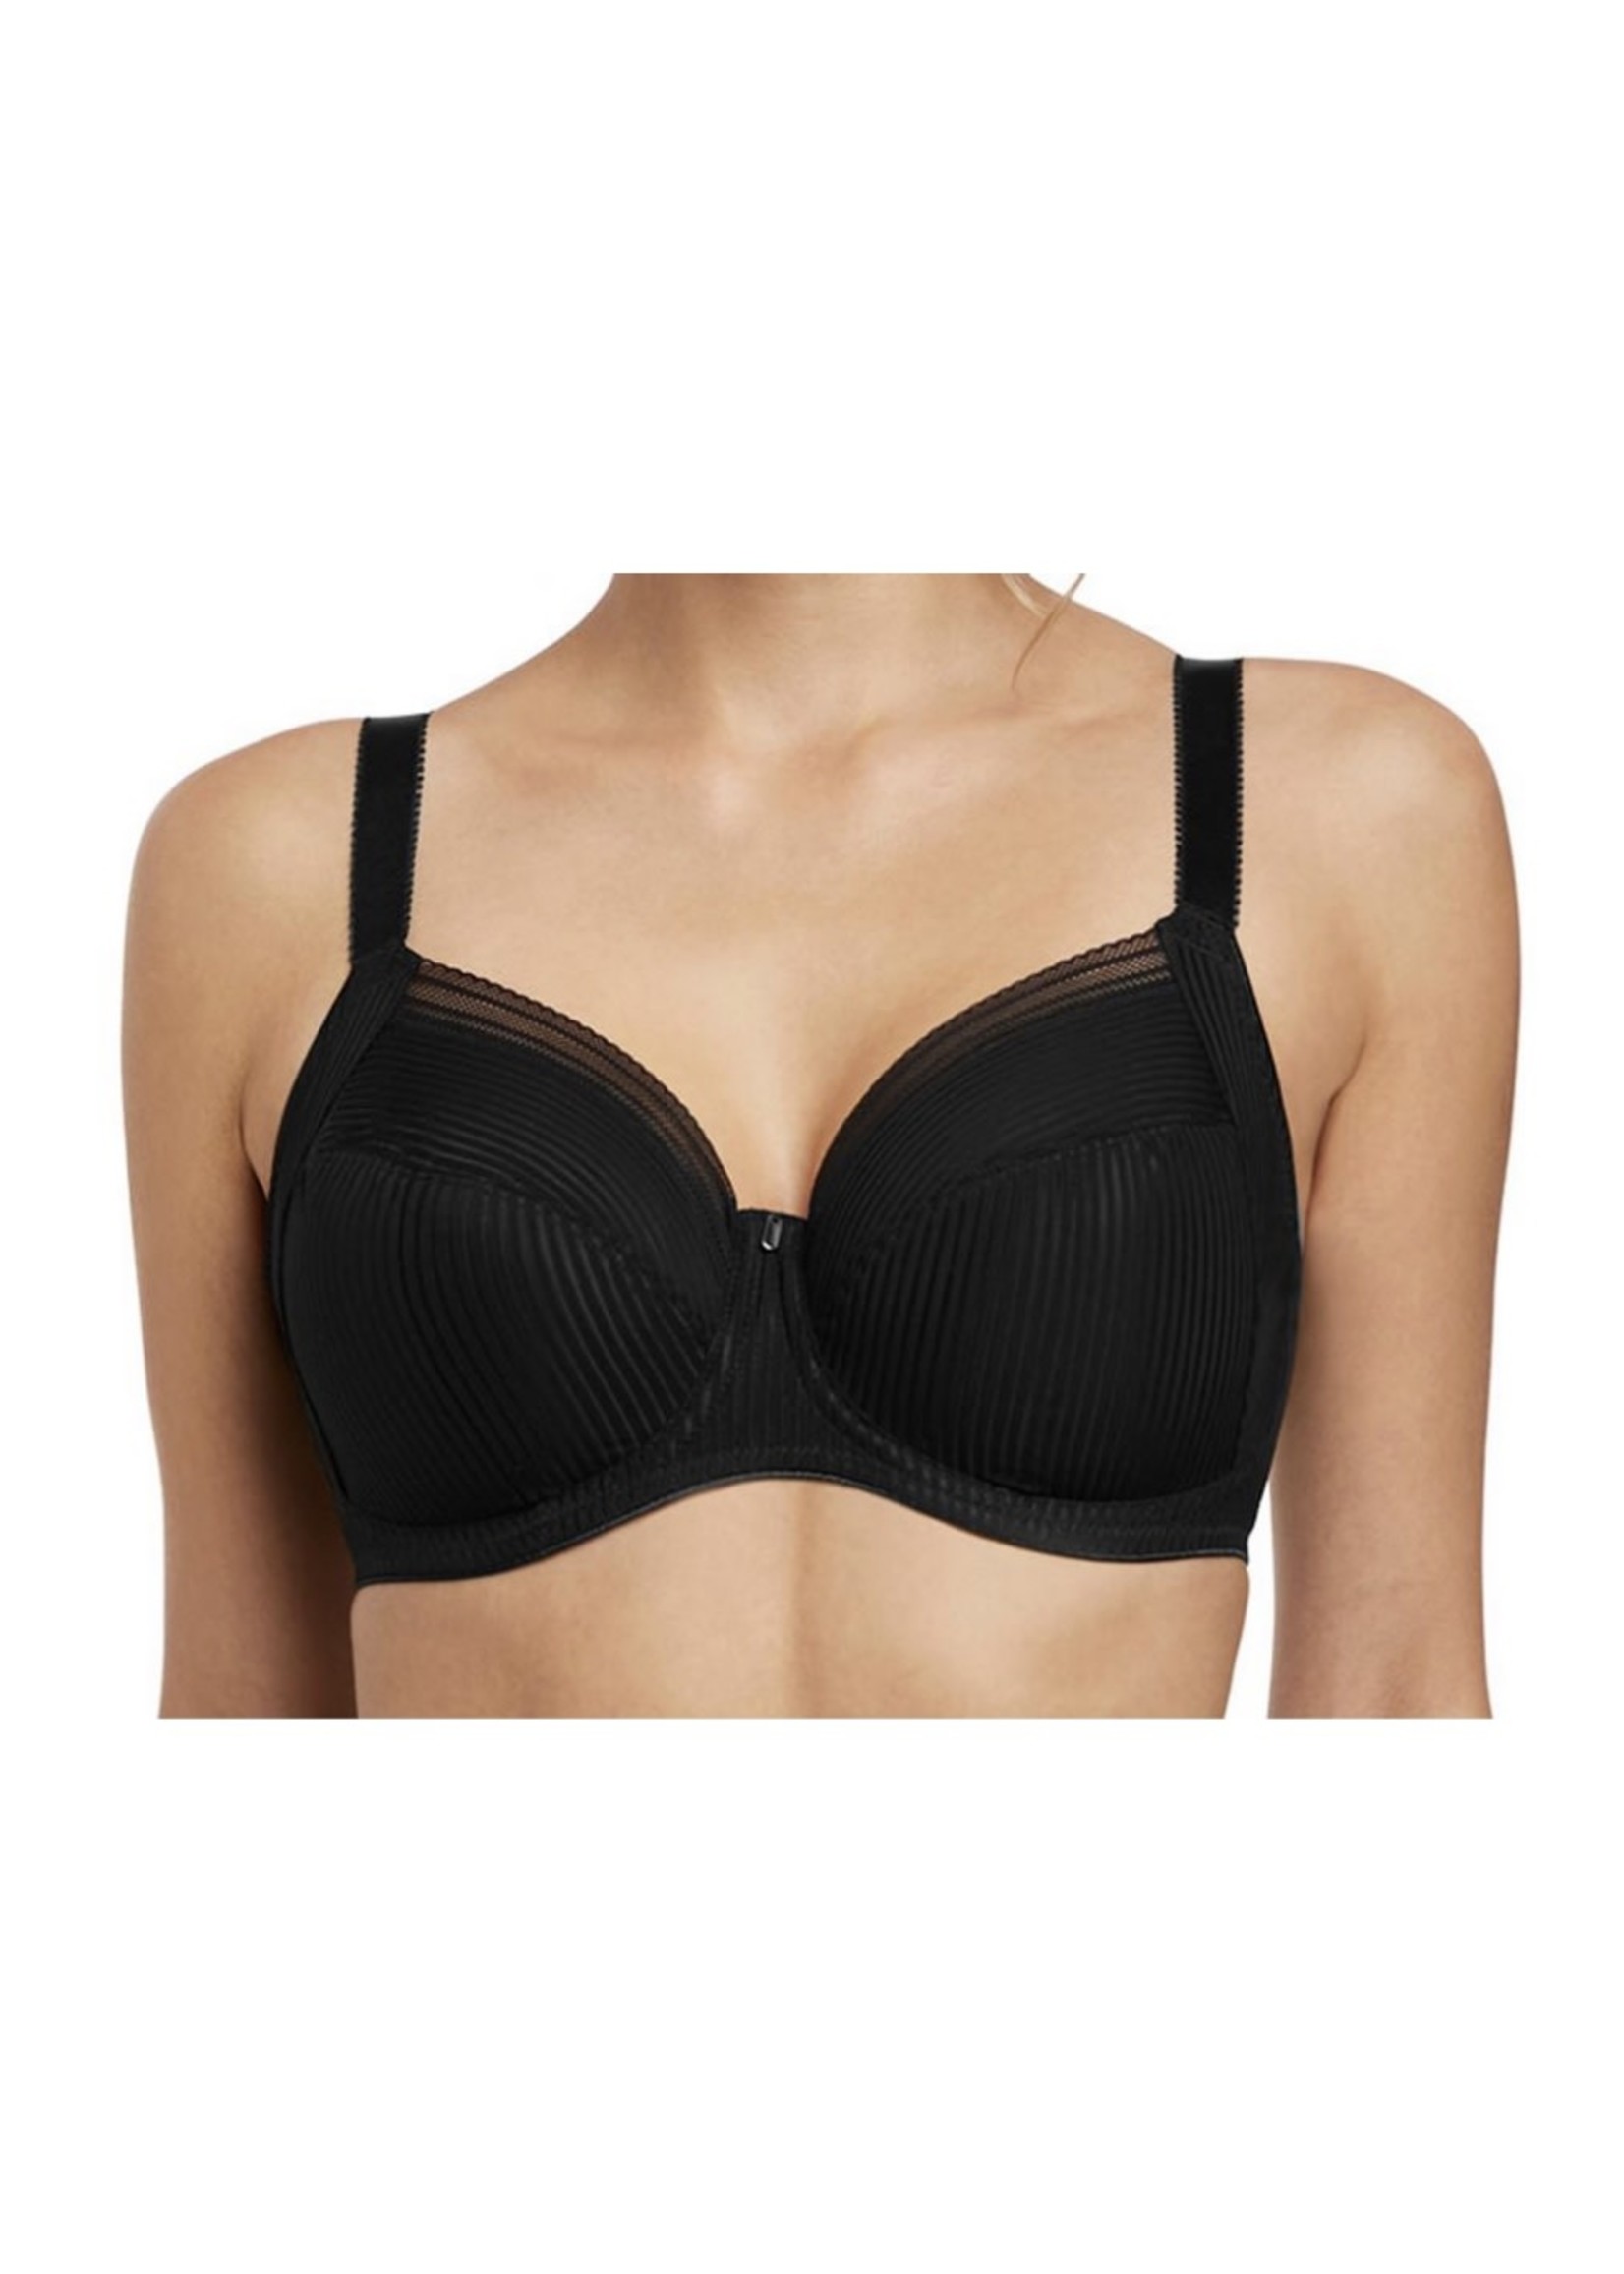 Fantasie FUSION UW FULL CUP SIDE SUPPORT BRA